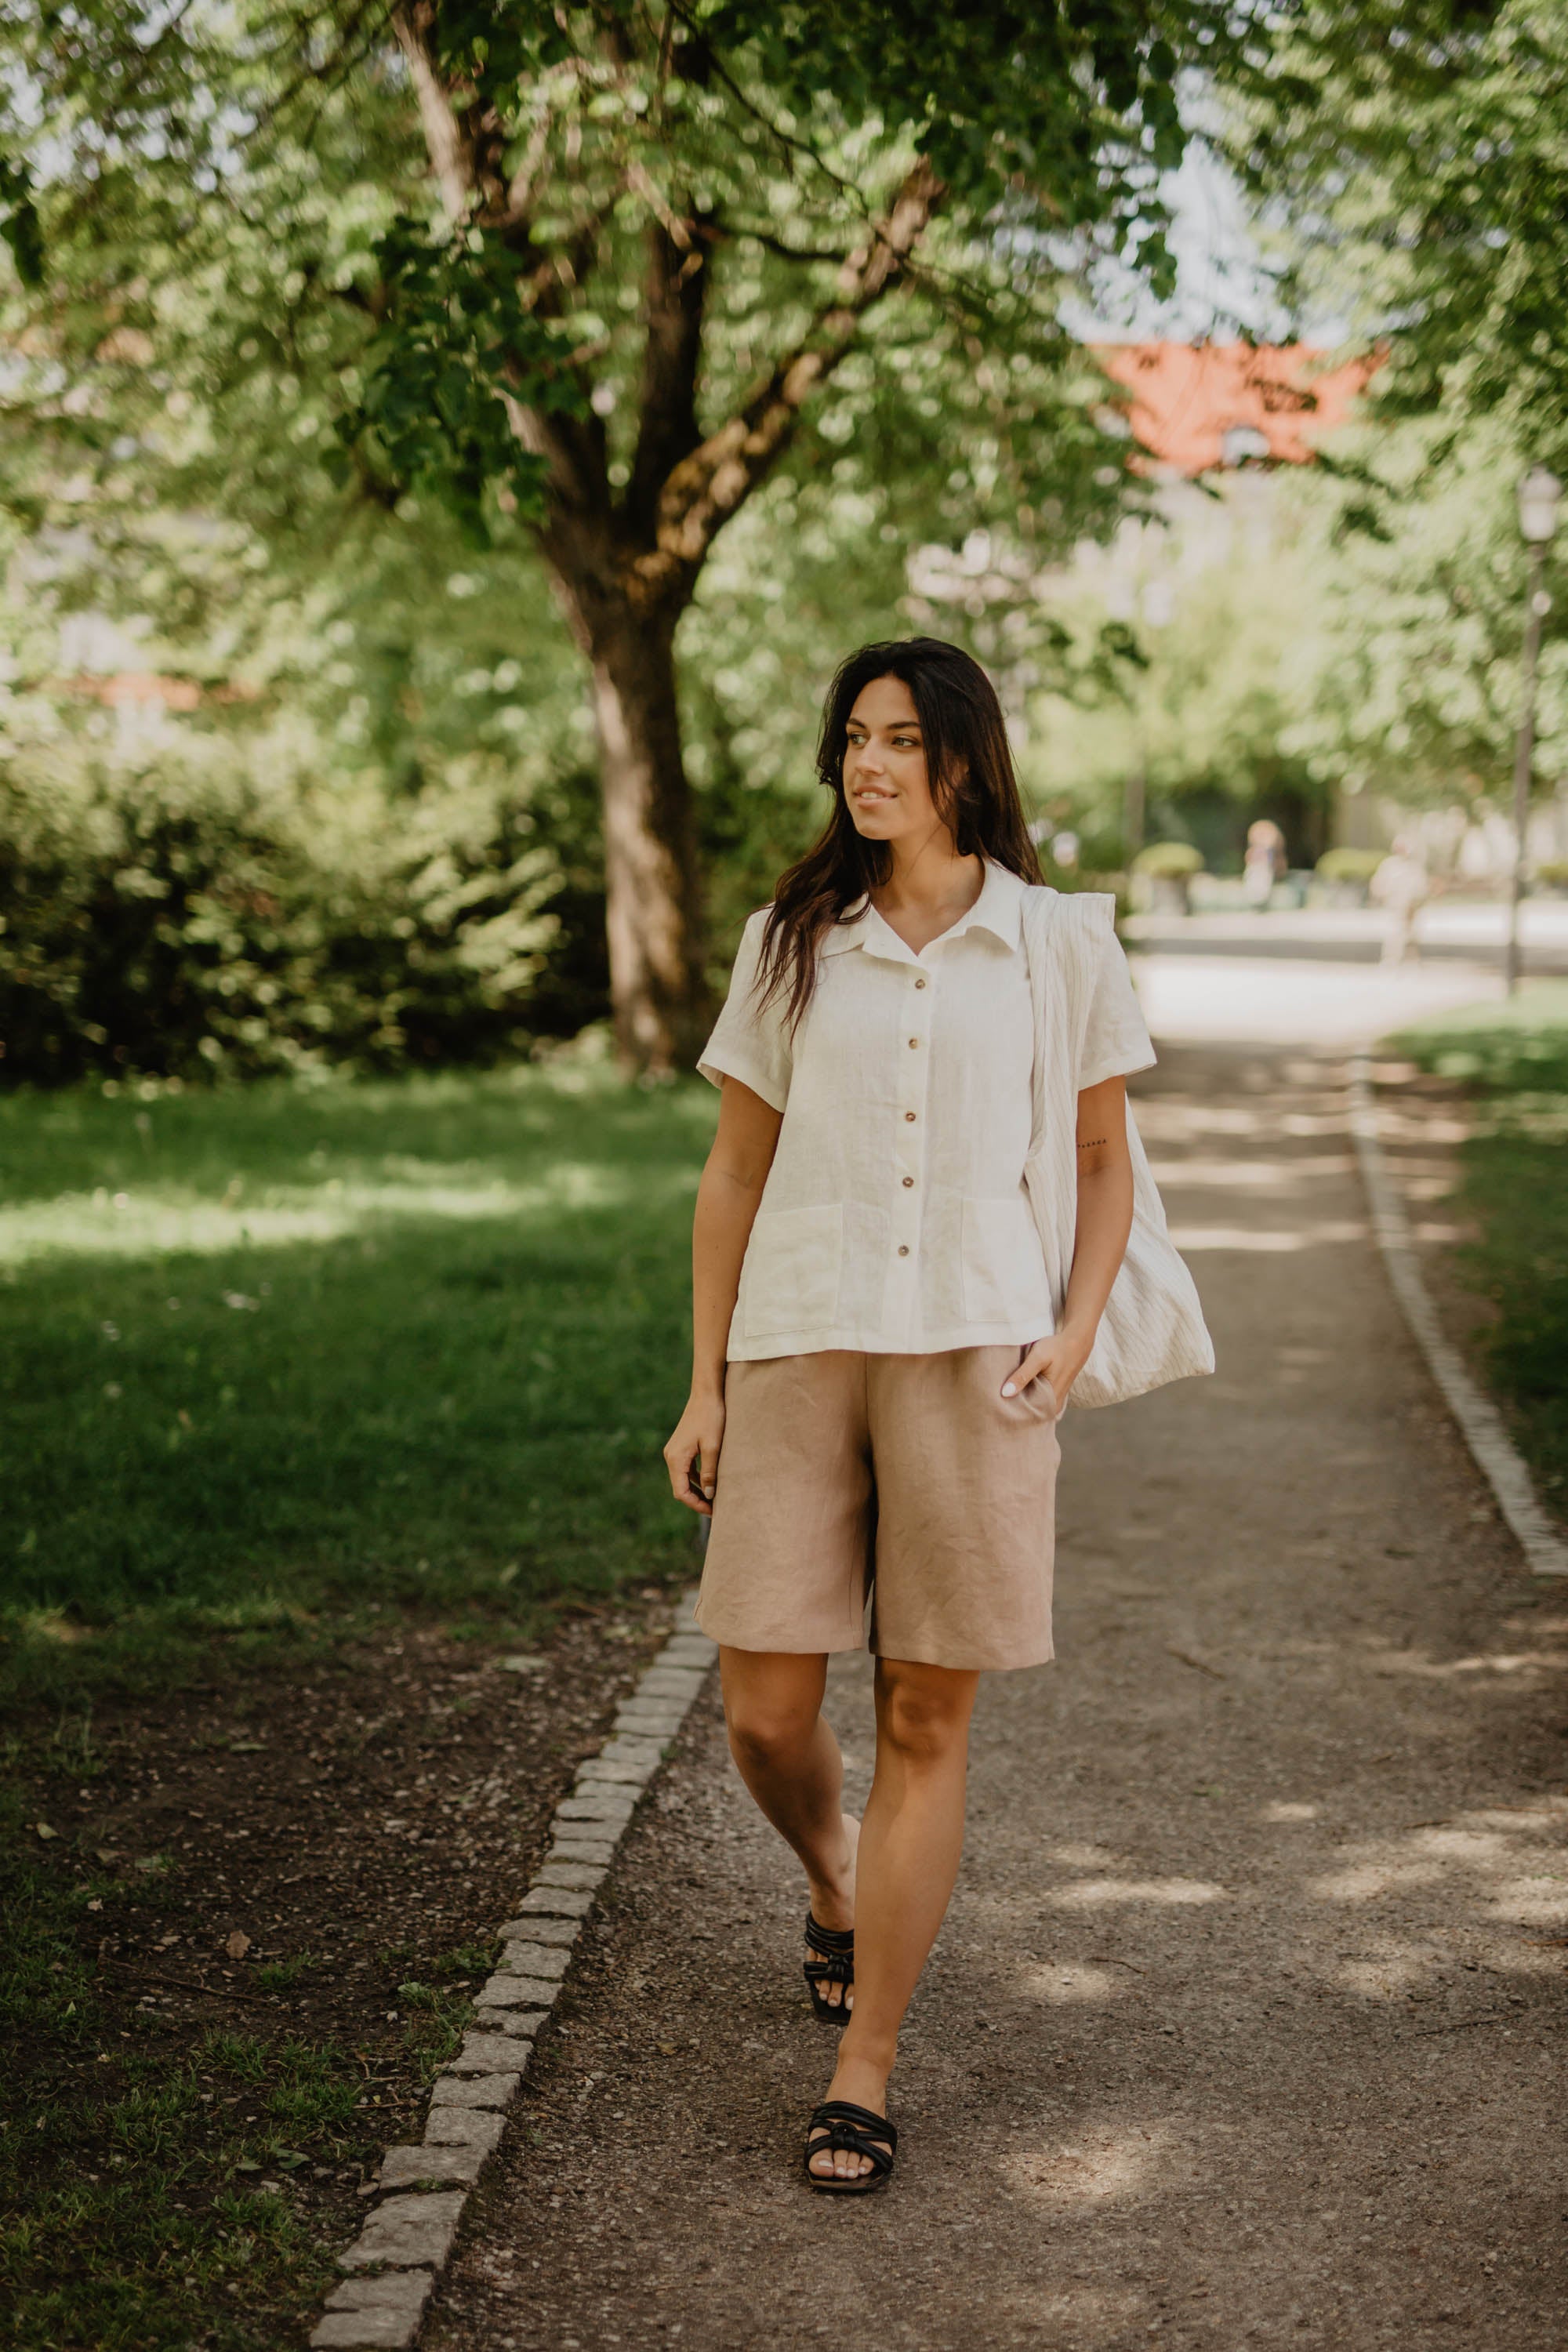 Woman In Park Walking In Cream Color Long Linen Shorts and A Short Sleeved White Linen Shirt